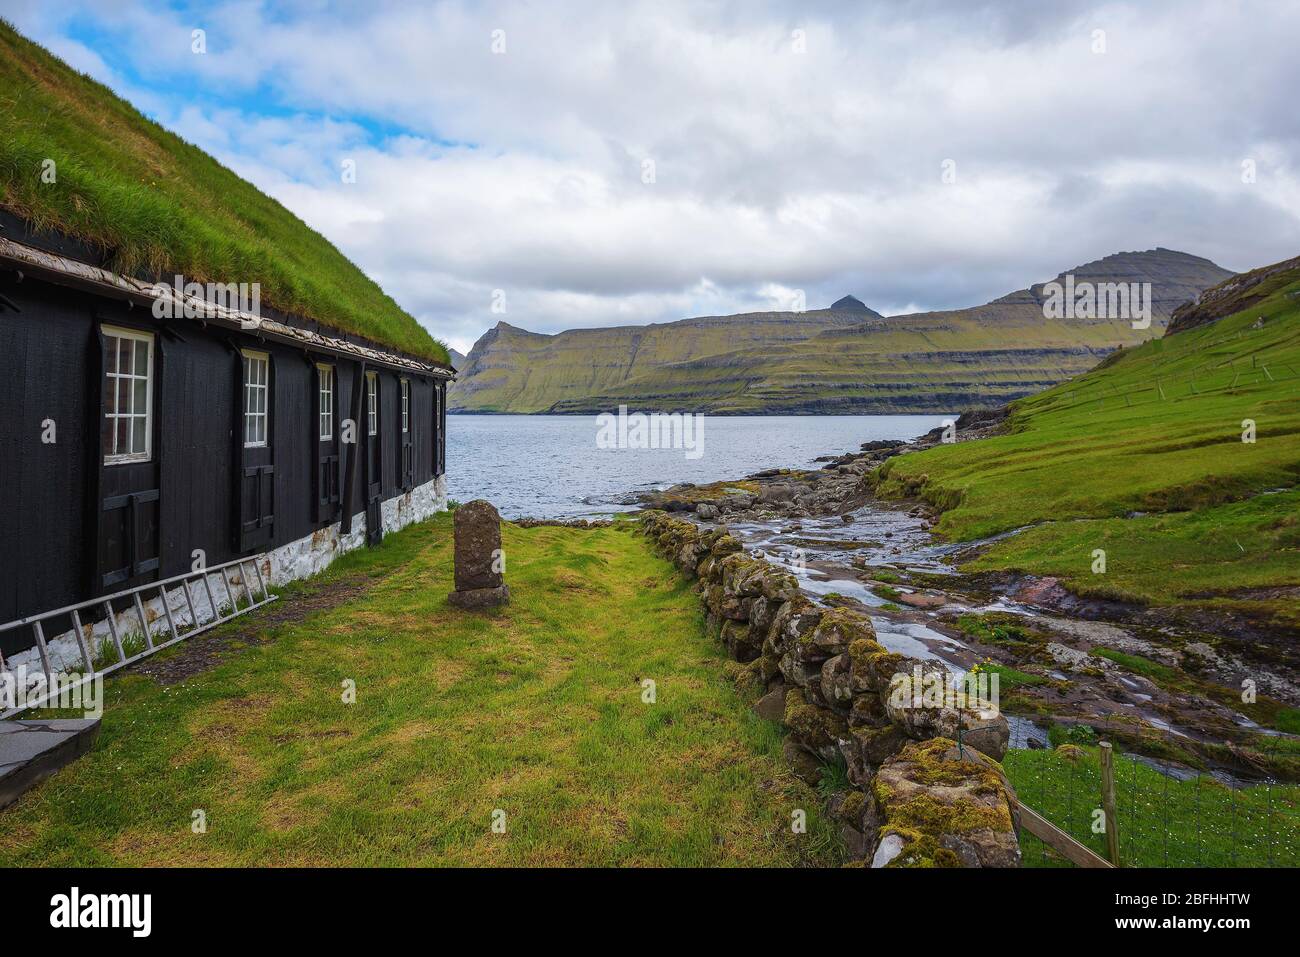 Small wooden village church with a tomb stone in Faroe Islands, Denmark Stock Photo